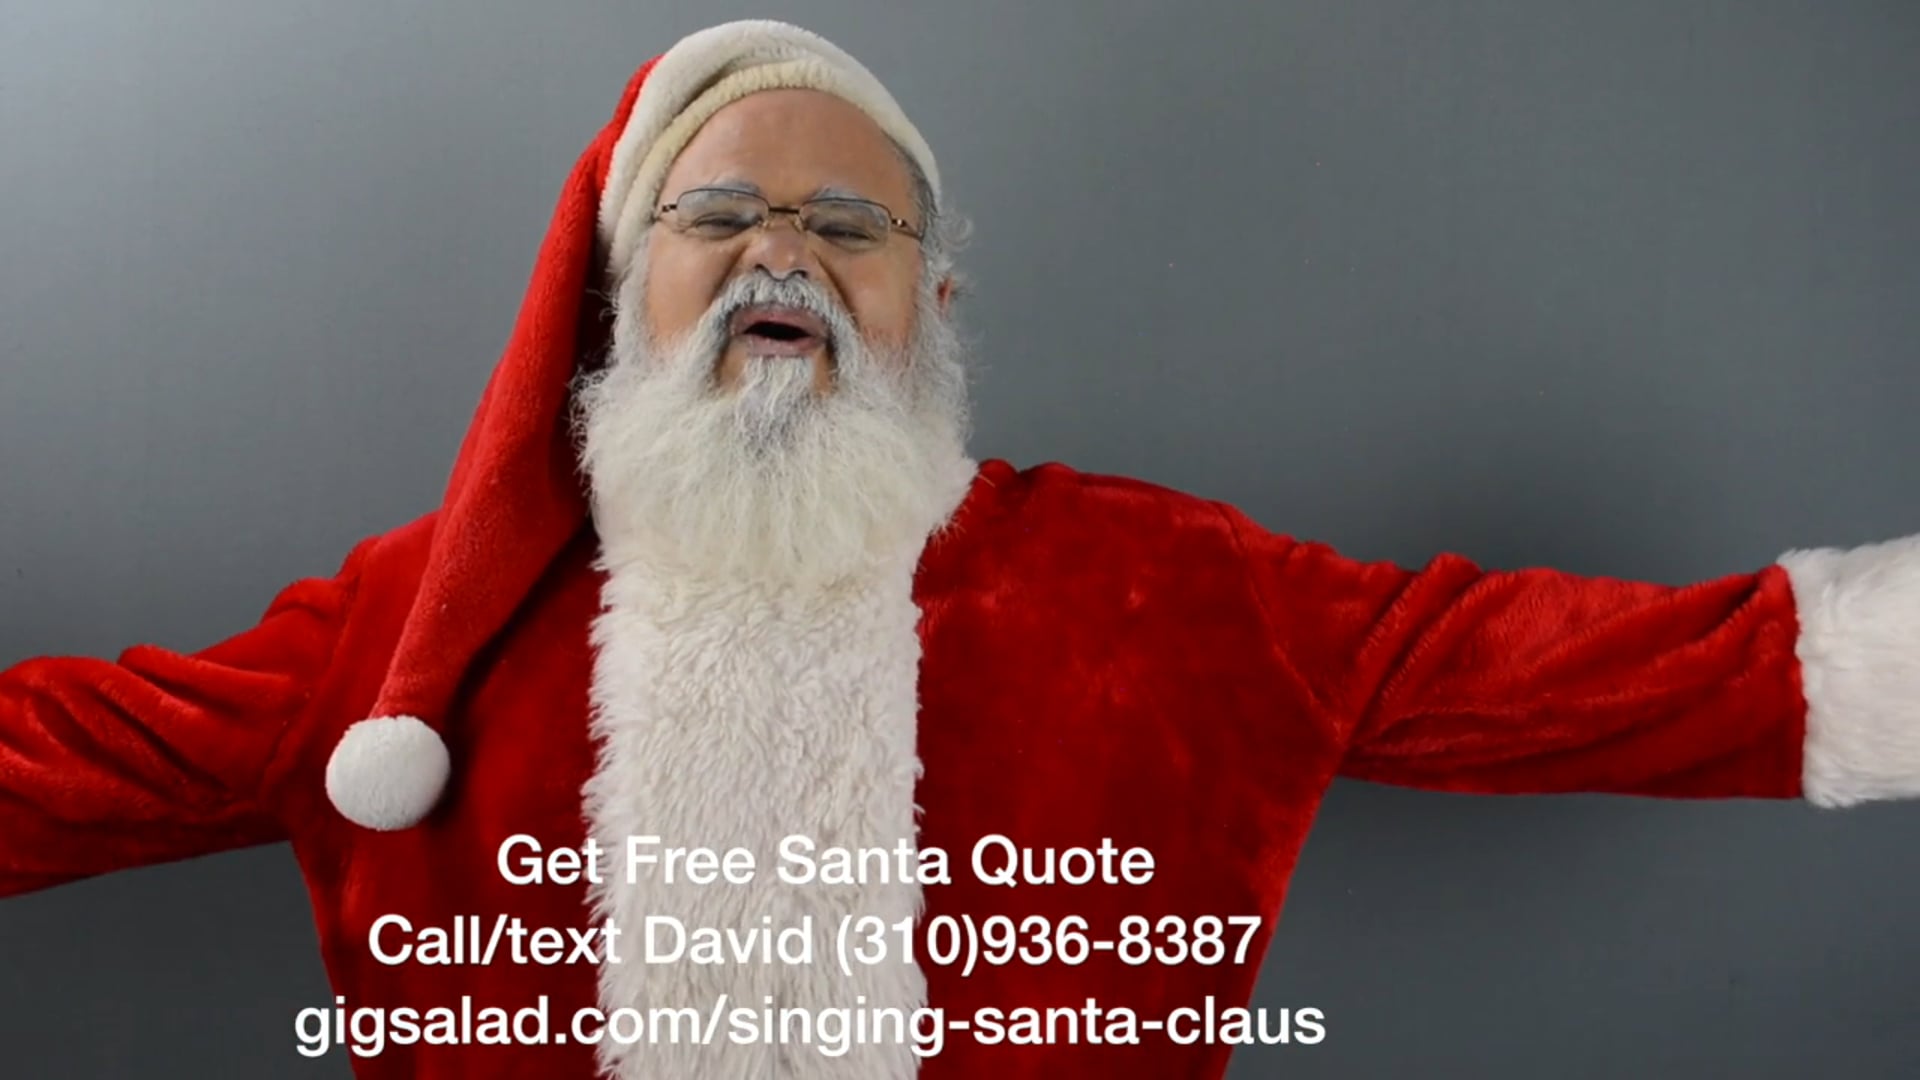 Promotional video thumbnail 1 for The Singing Santa Claus of Los Angeles